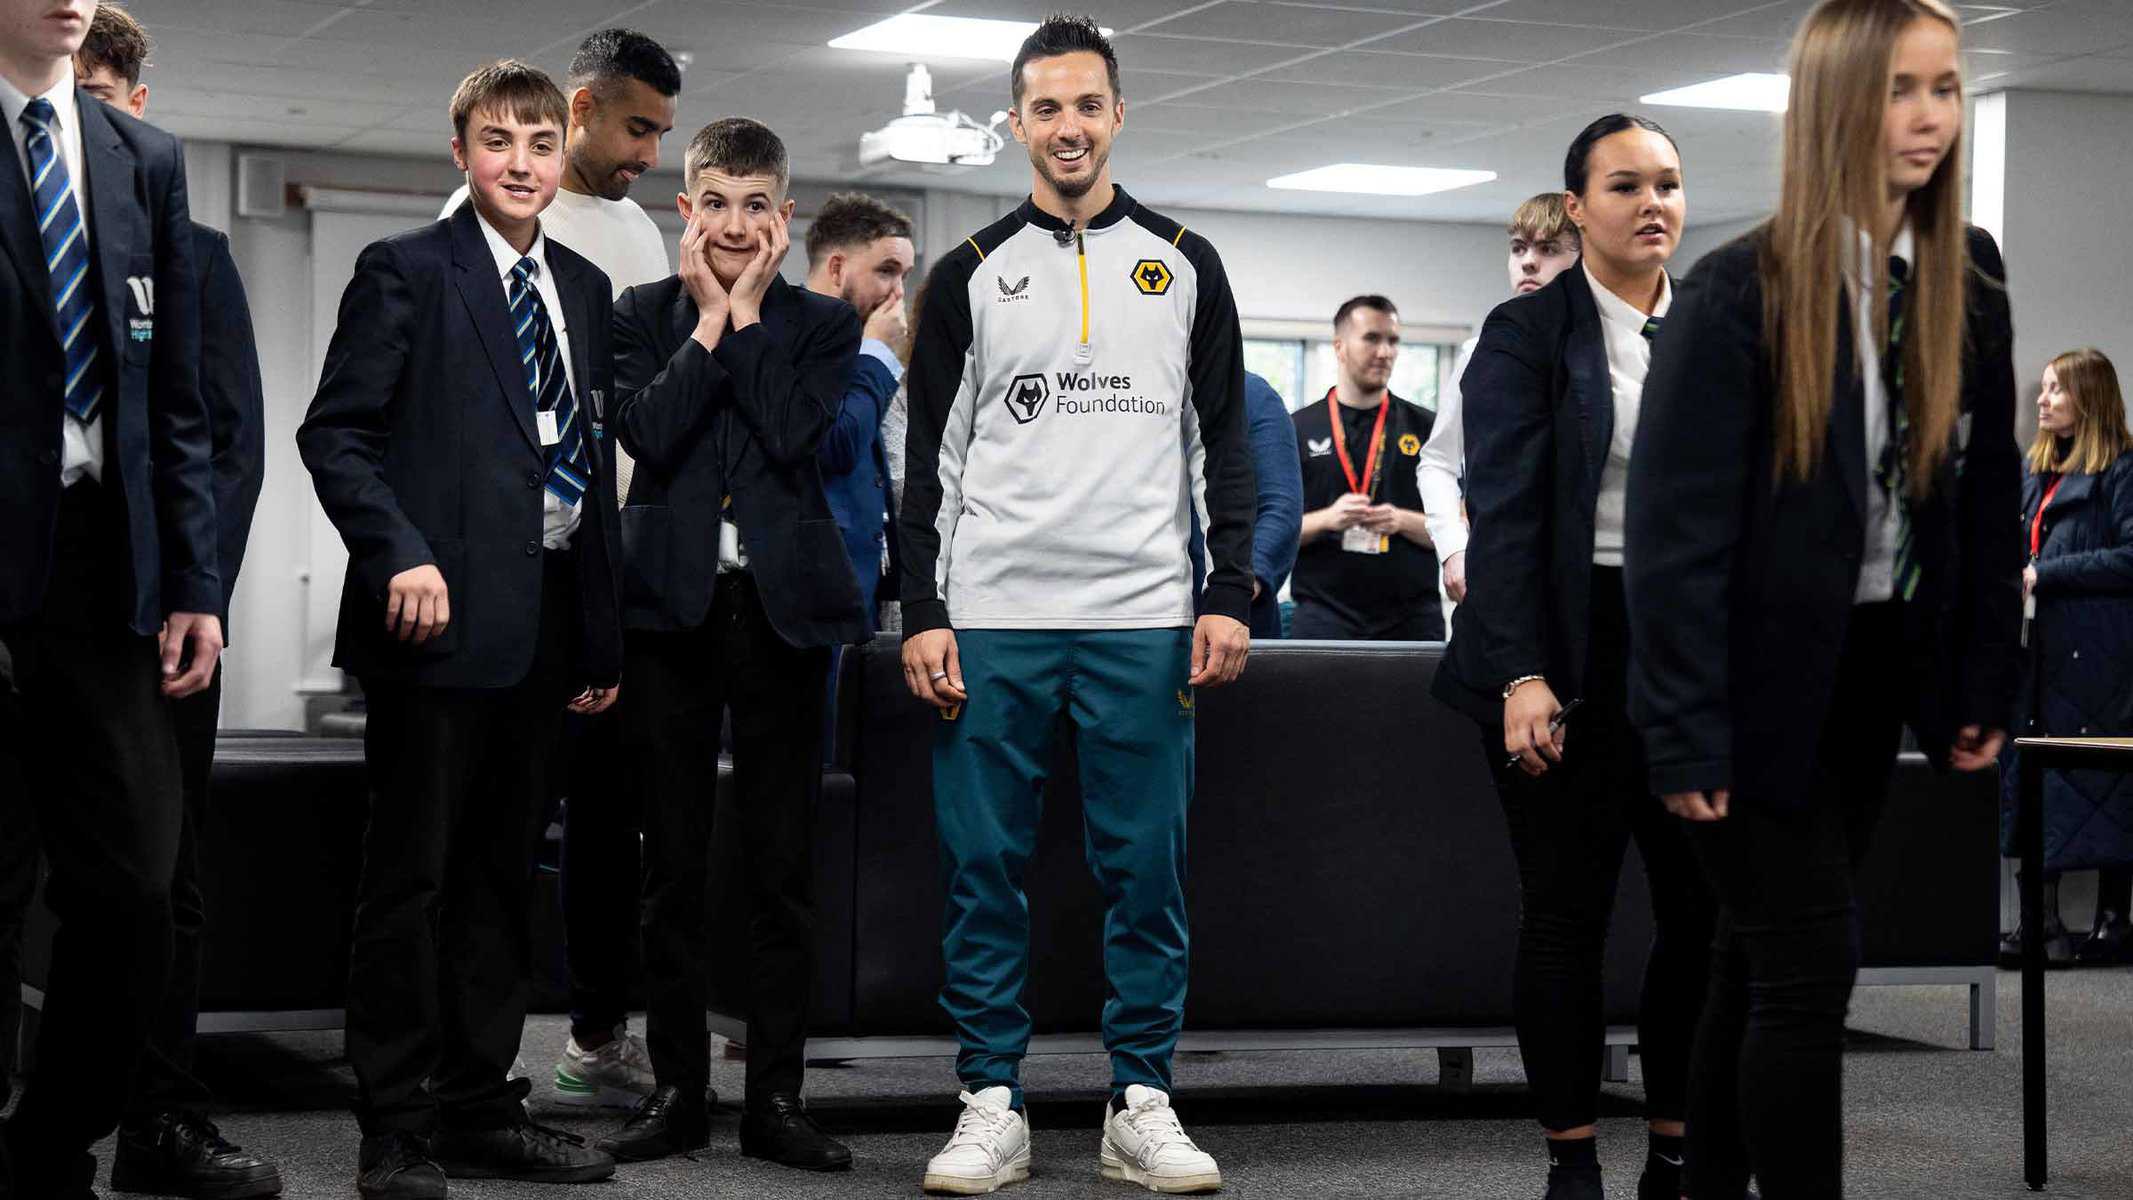 Premier League Inspires: Sarabia leading the way for students Image